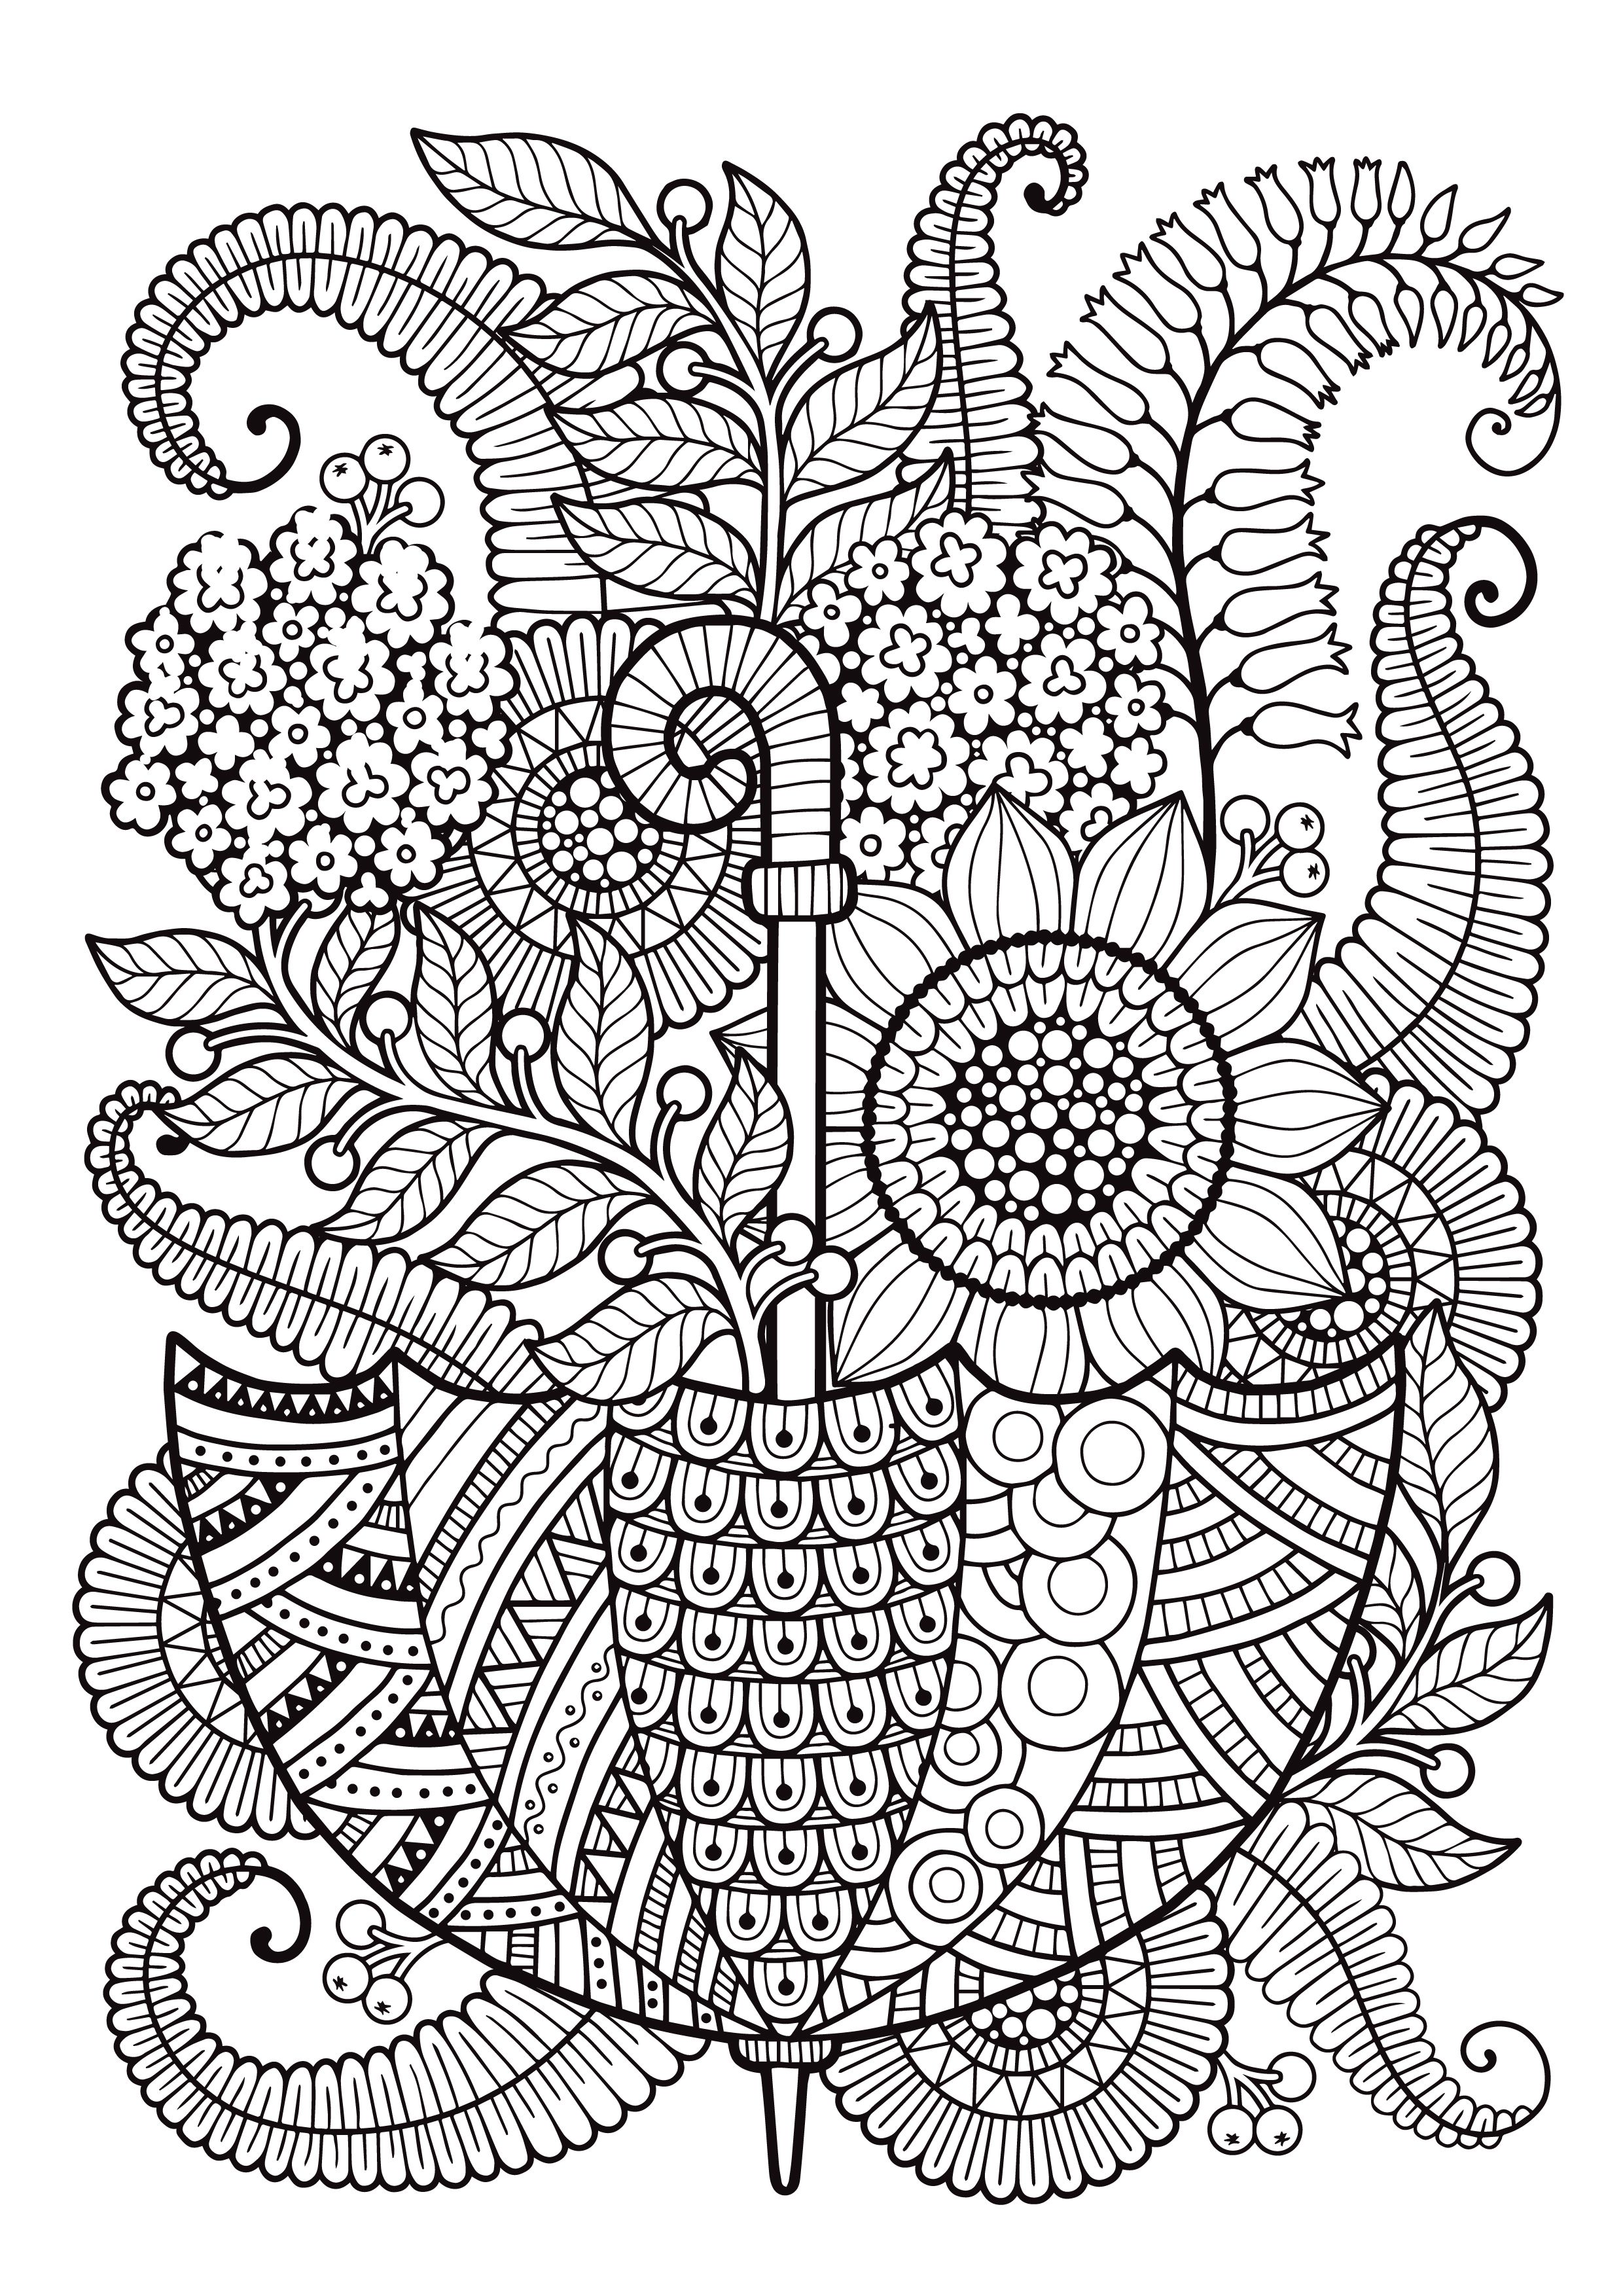 Mindfulness Coloring Pages   Coloring Home